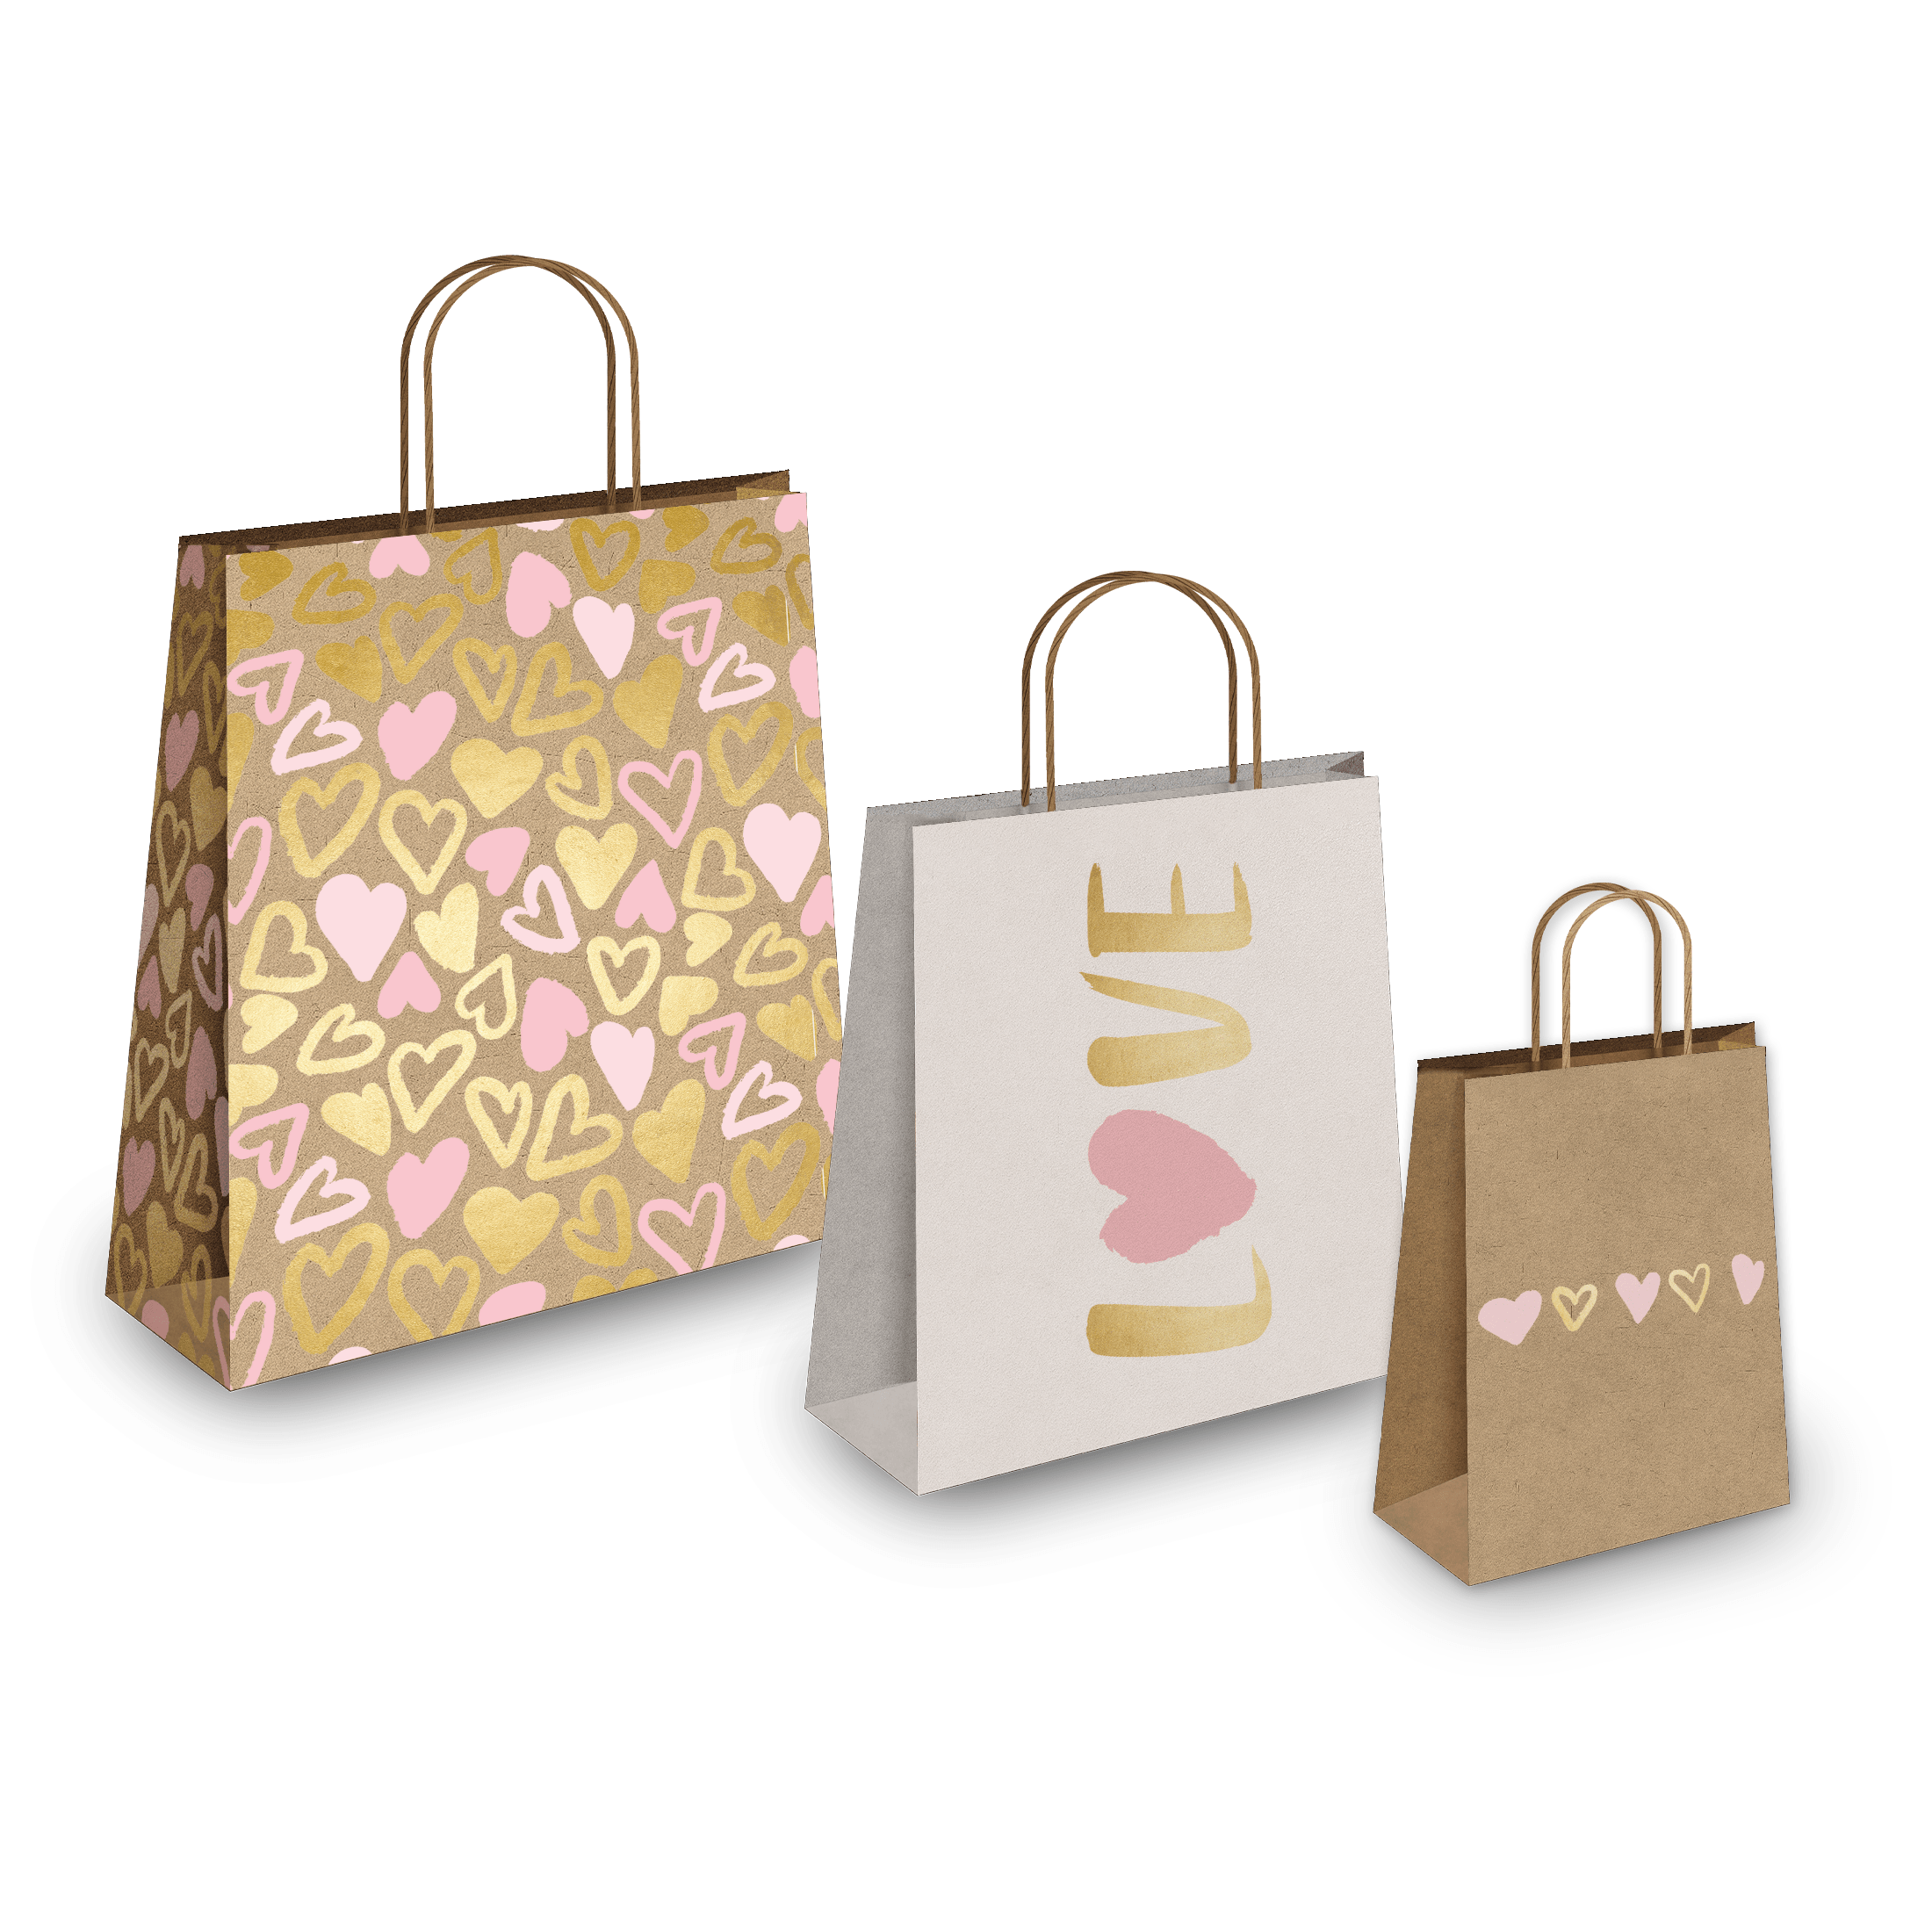 Pro Supply Global Printed Kraft Bags Shopping/Gift Bags for Valentines Day (12 Count Mixed Size Bags, Pink and Gold Hearts)